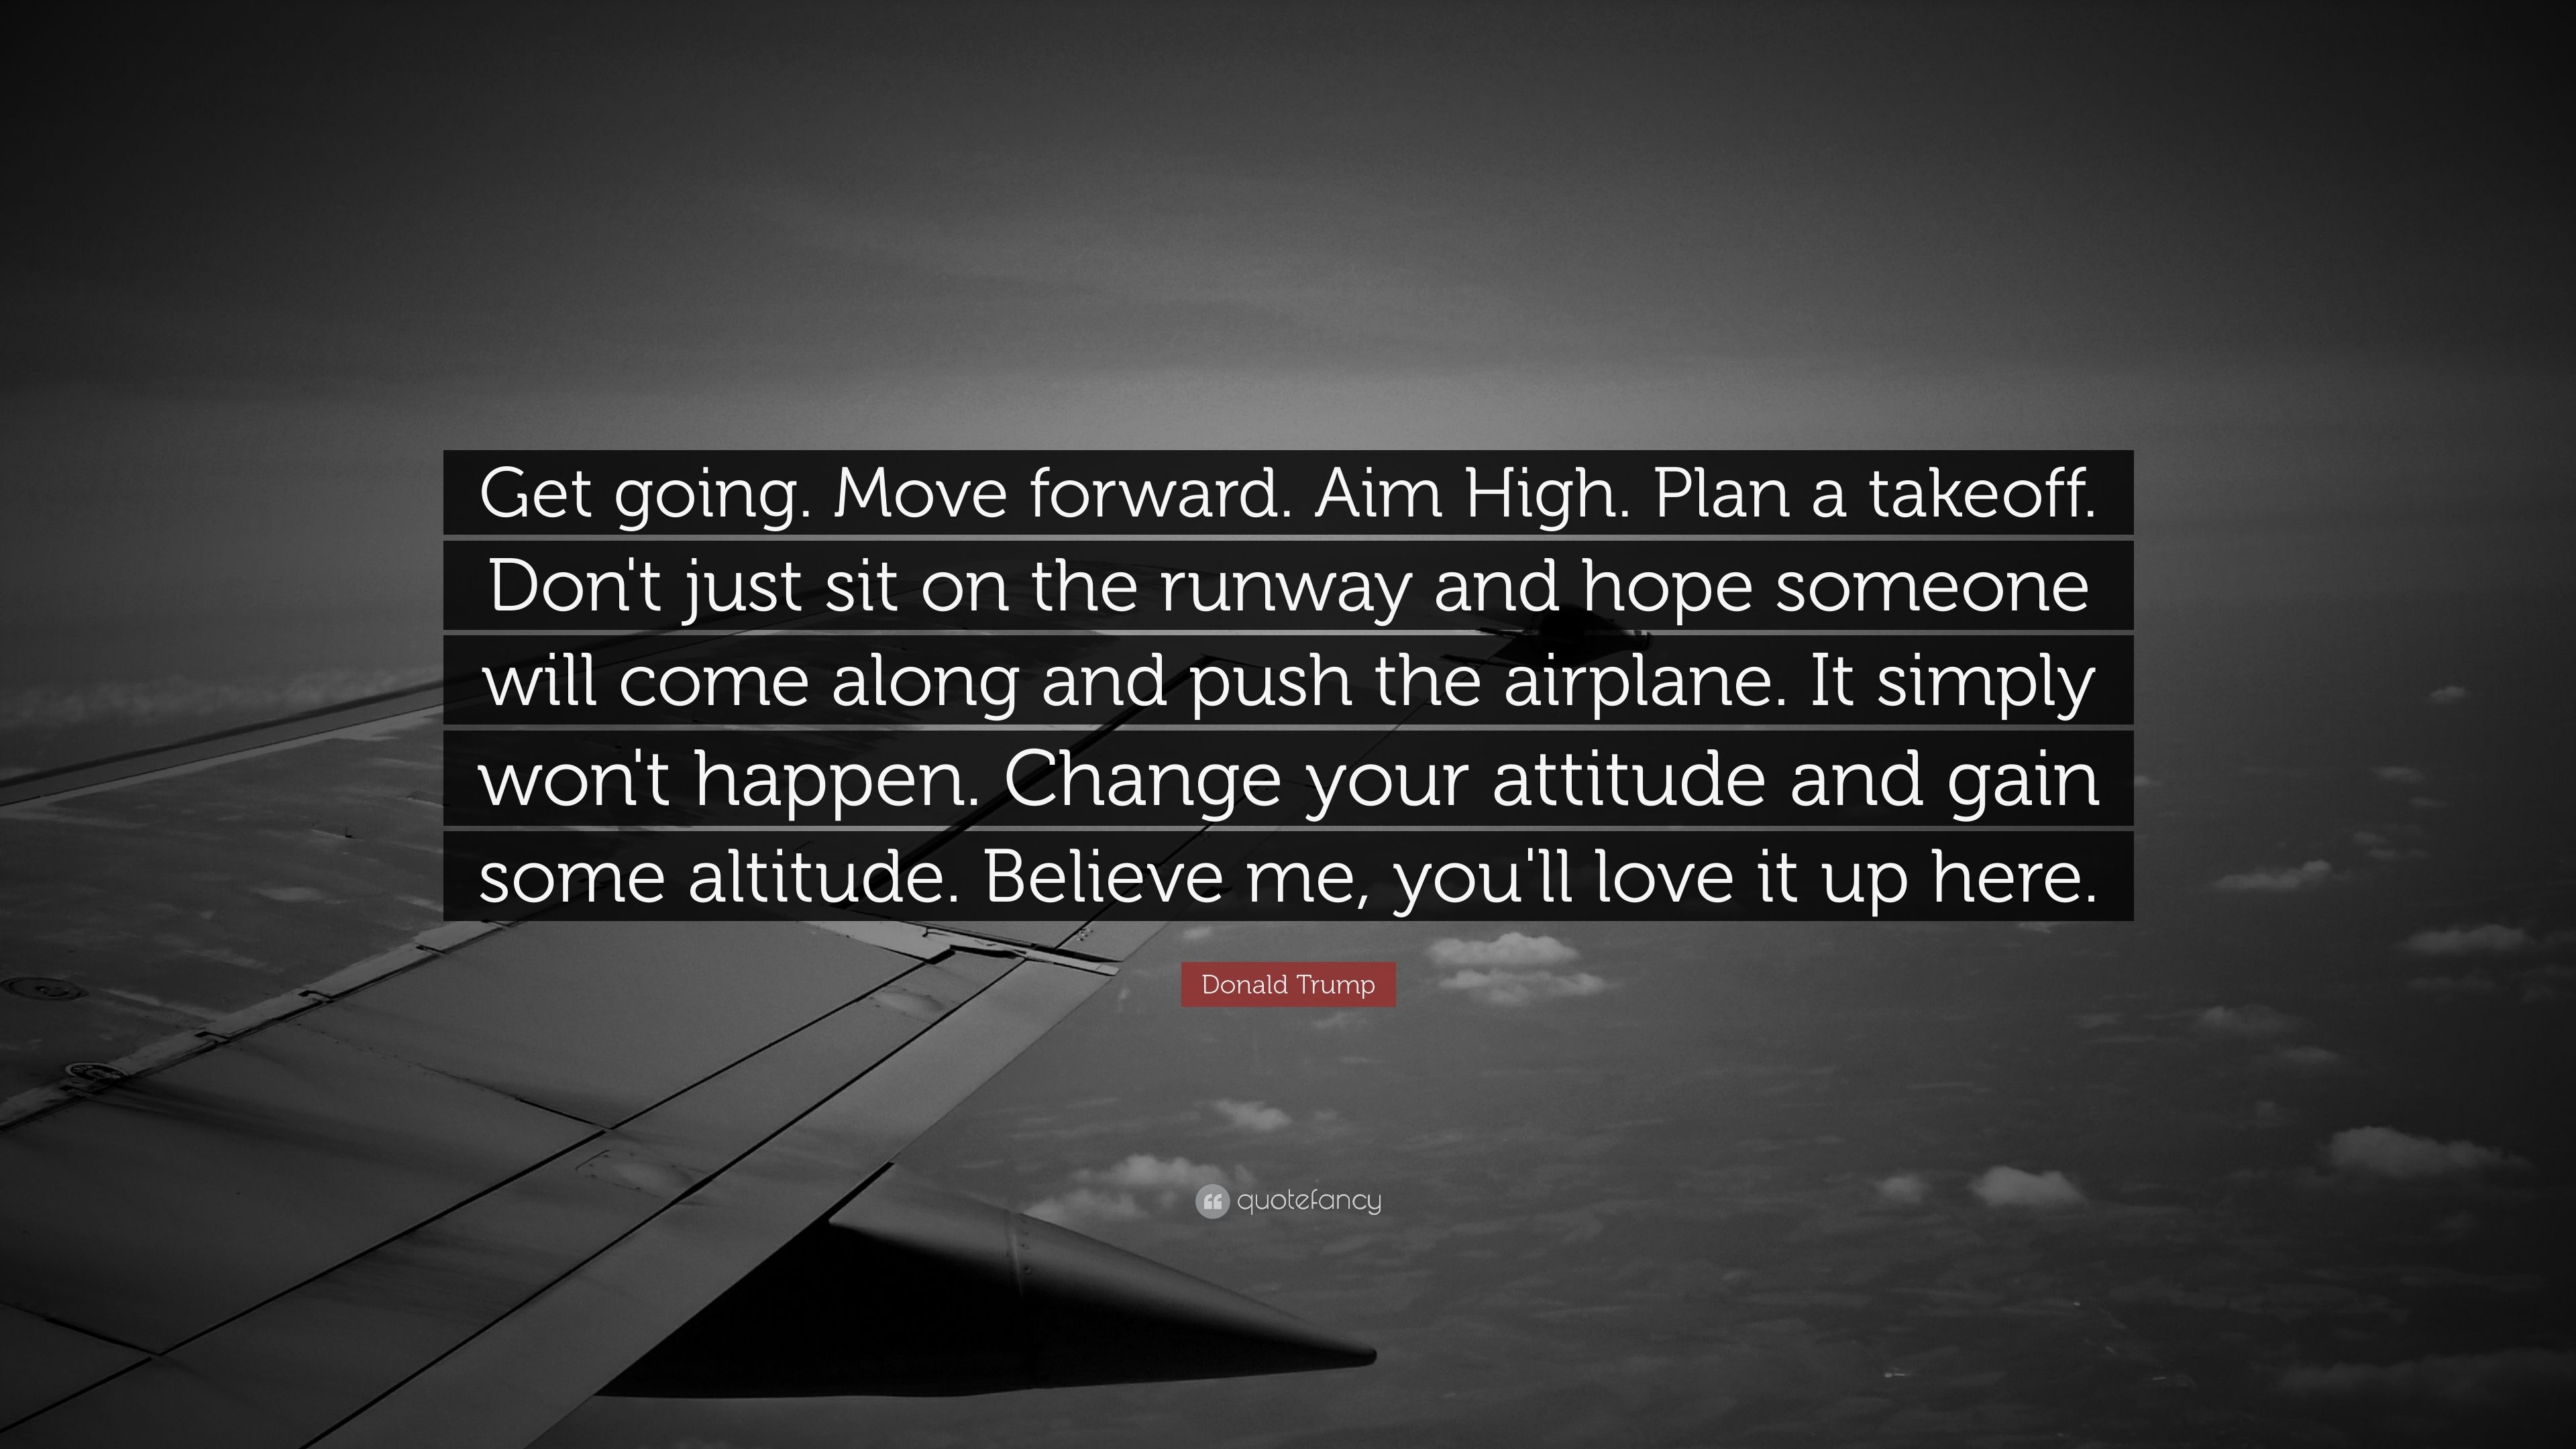 Donald Trump Quote Get going. Move forward. Aim High. Plan a